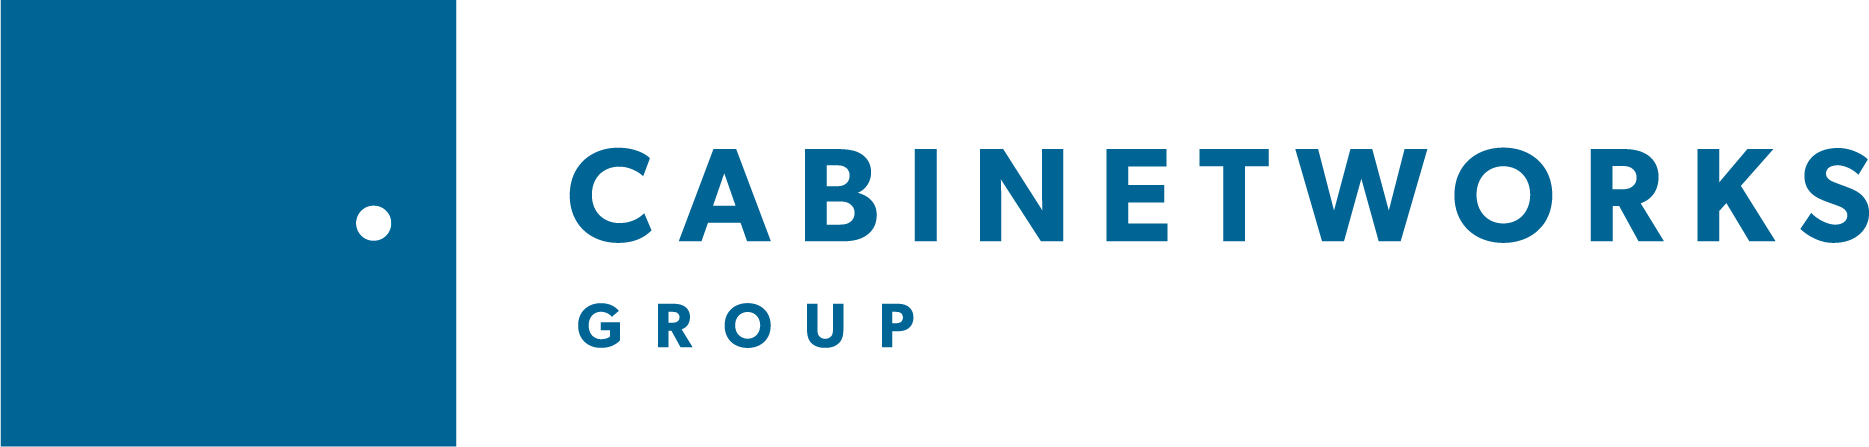 Cabinetworks Group logo